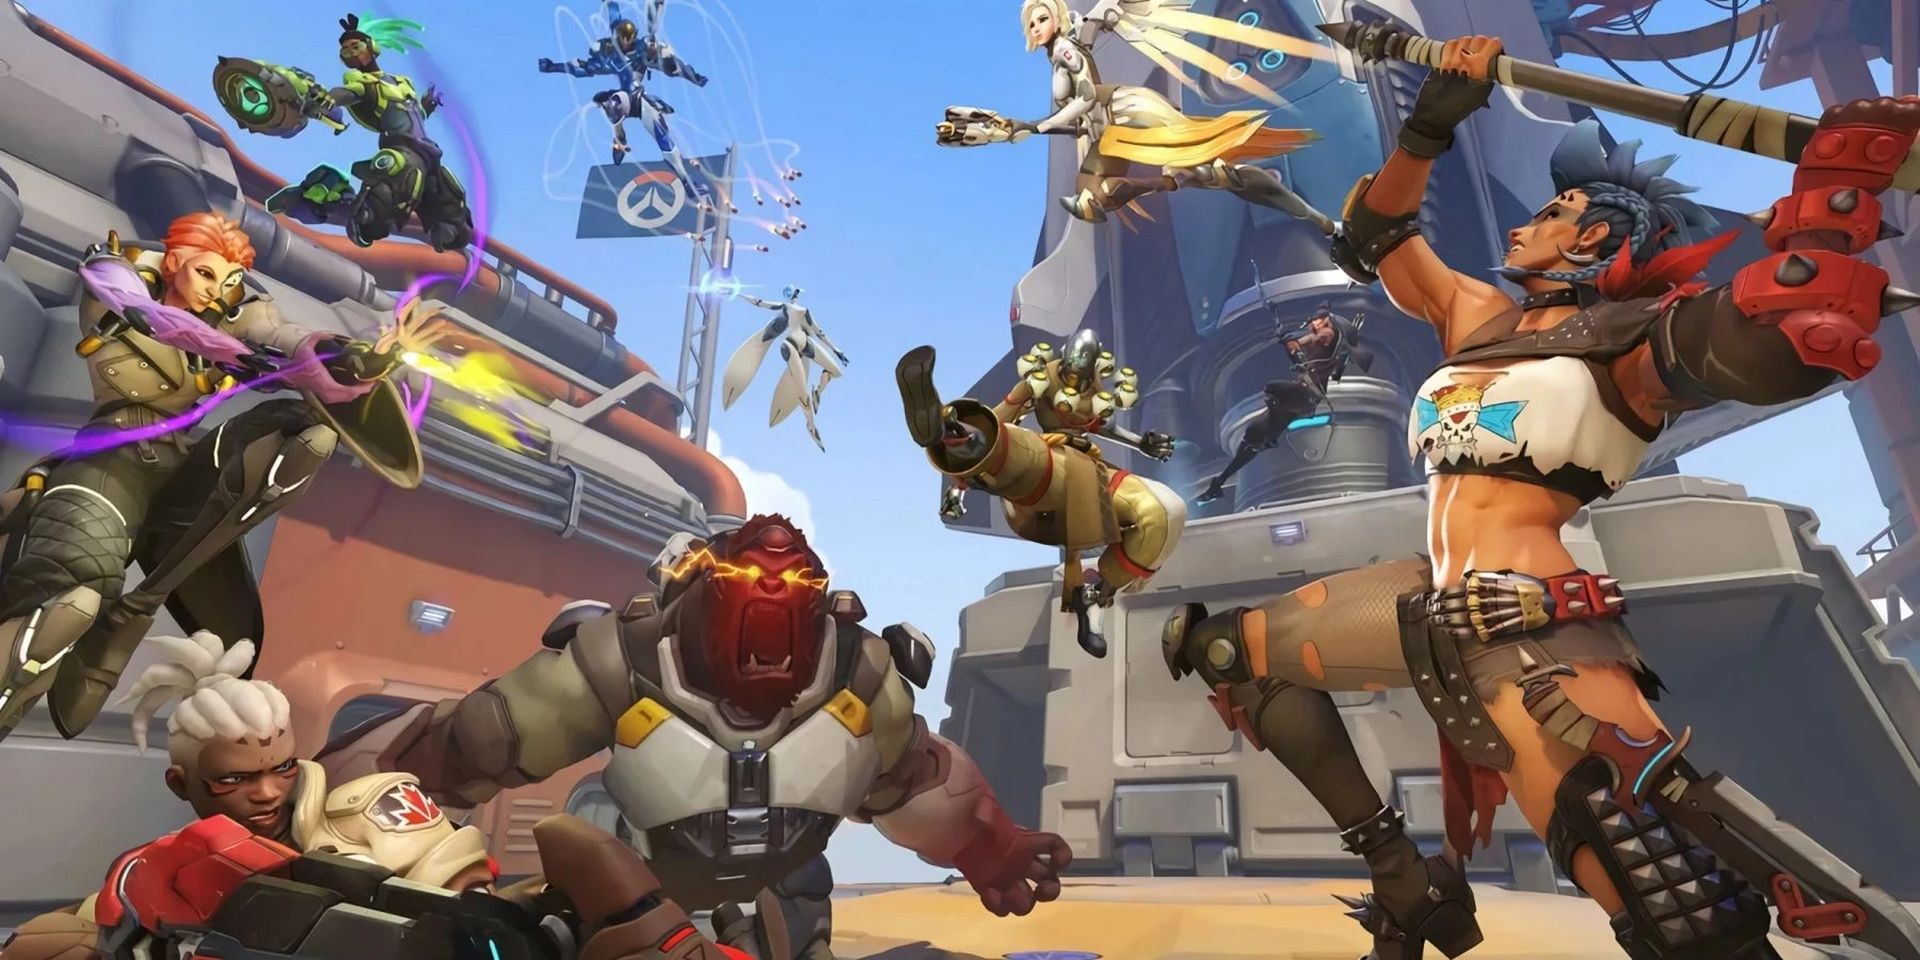 In this article, we are going to be going over everything about Overwatch 2 Watchpoint pack, so you can decide whether to buy it or not.